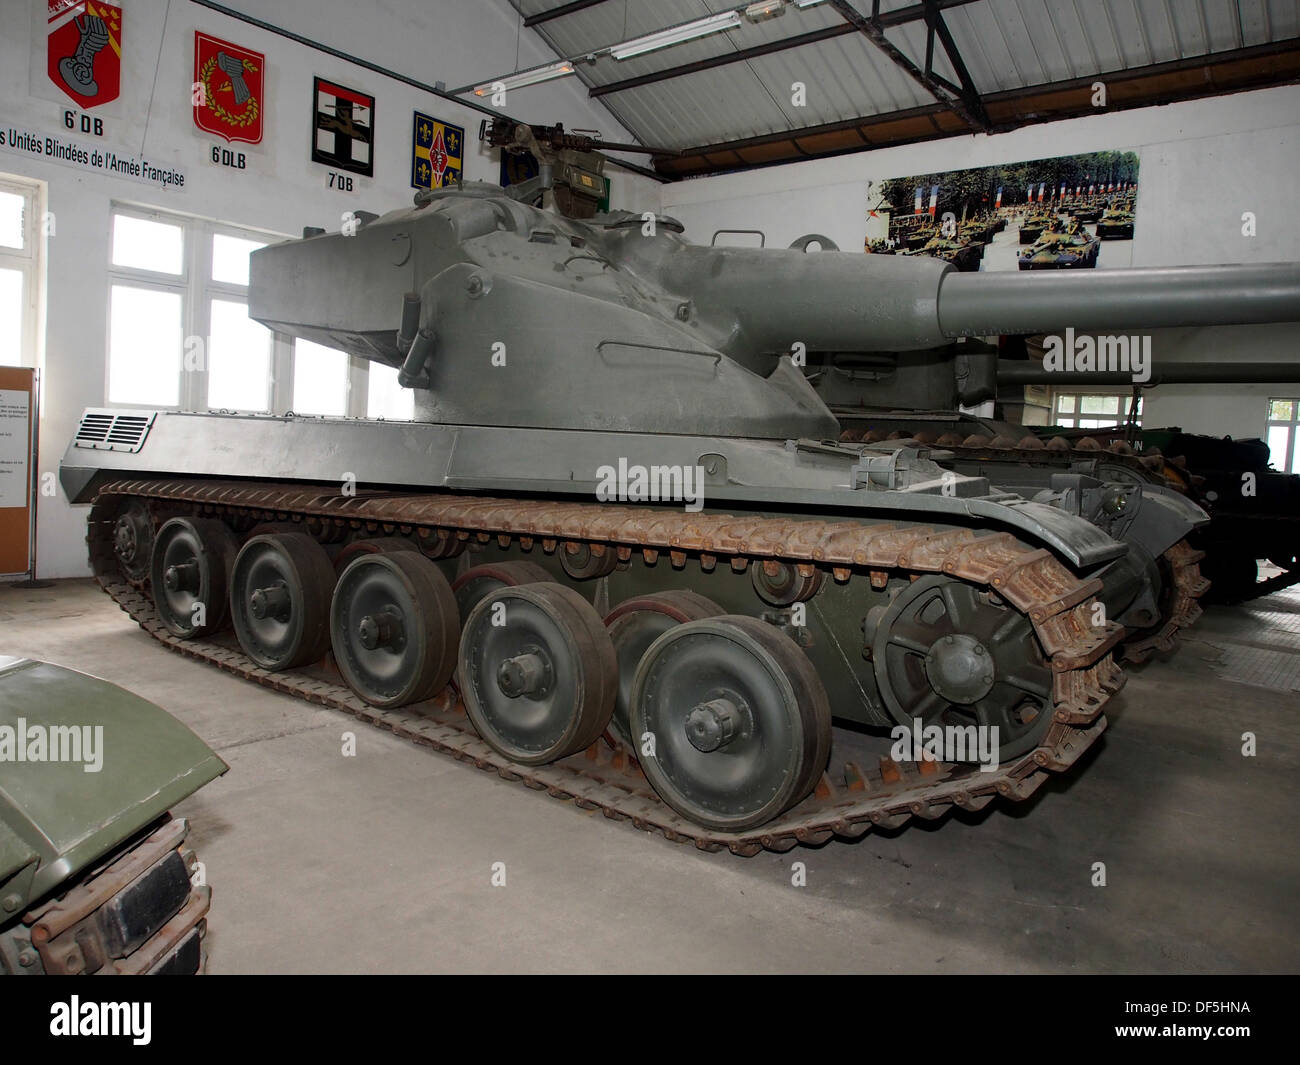 AMX-50, Tanks in the Muse des Blinds, France, pic-4 Stock Photo